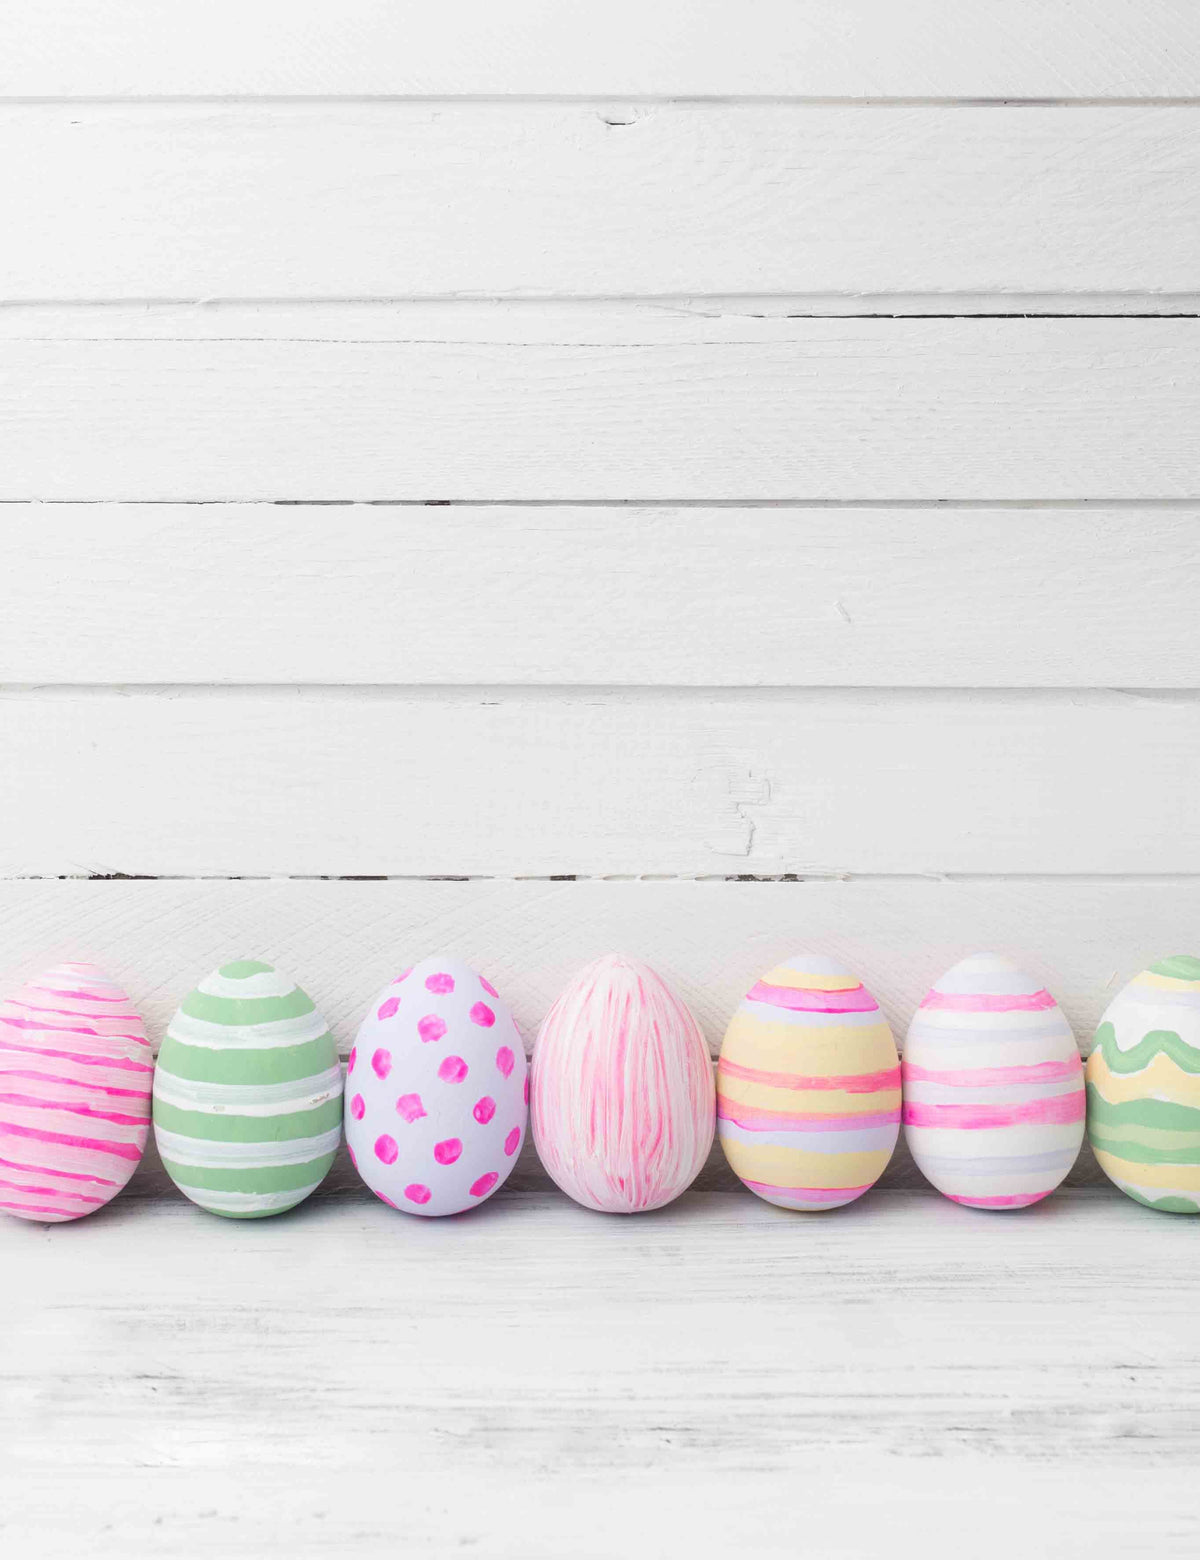 Easter Colorful Eggs On White Floor With Wood Wall Texture Backdrop For Photography Shopbackdrop